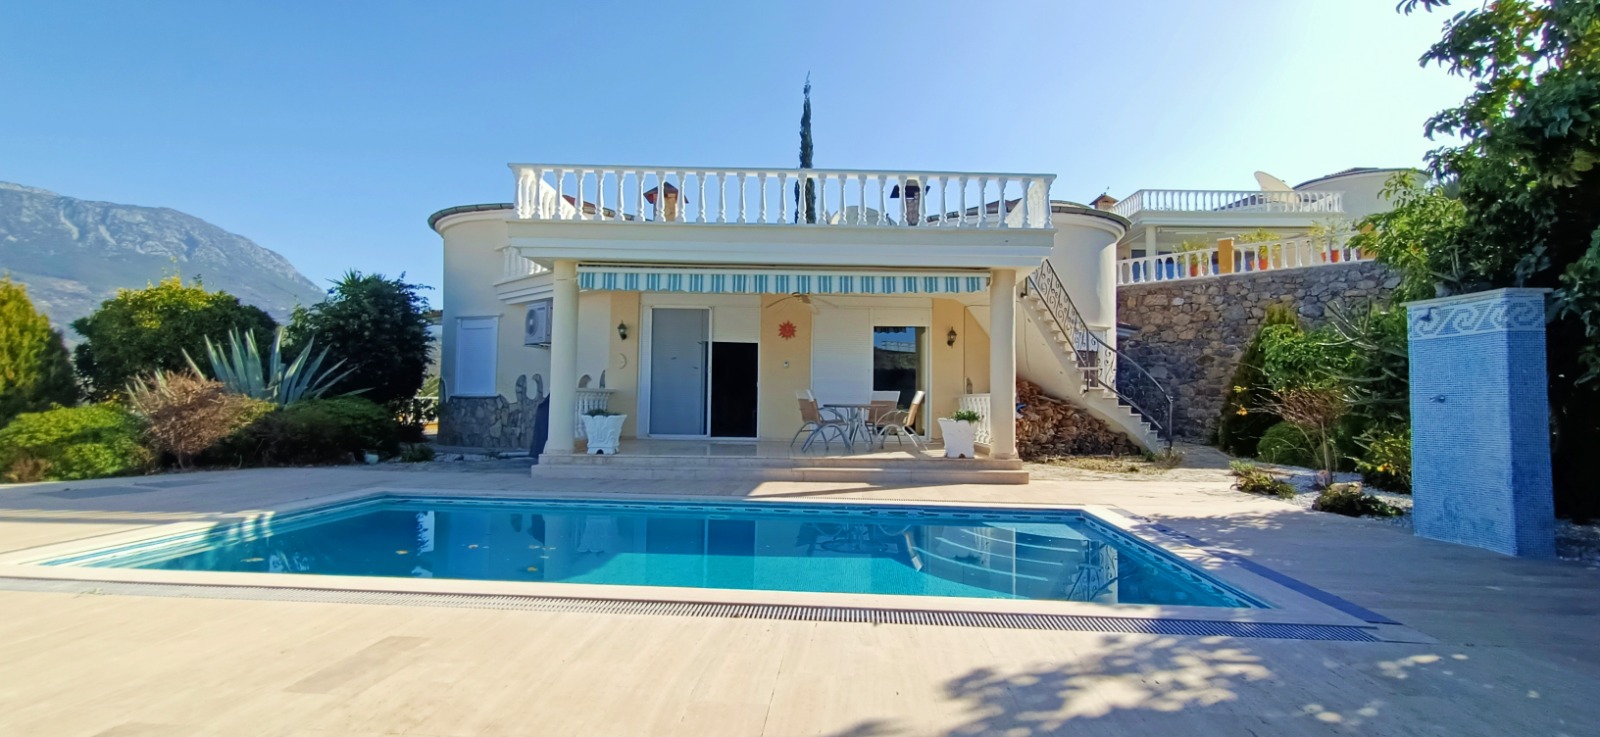 Detached 3+1 furnished villa with pool in Kargicak, 605 m2 фото 1